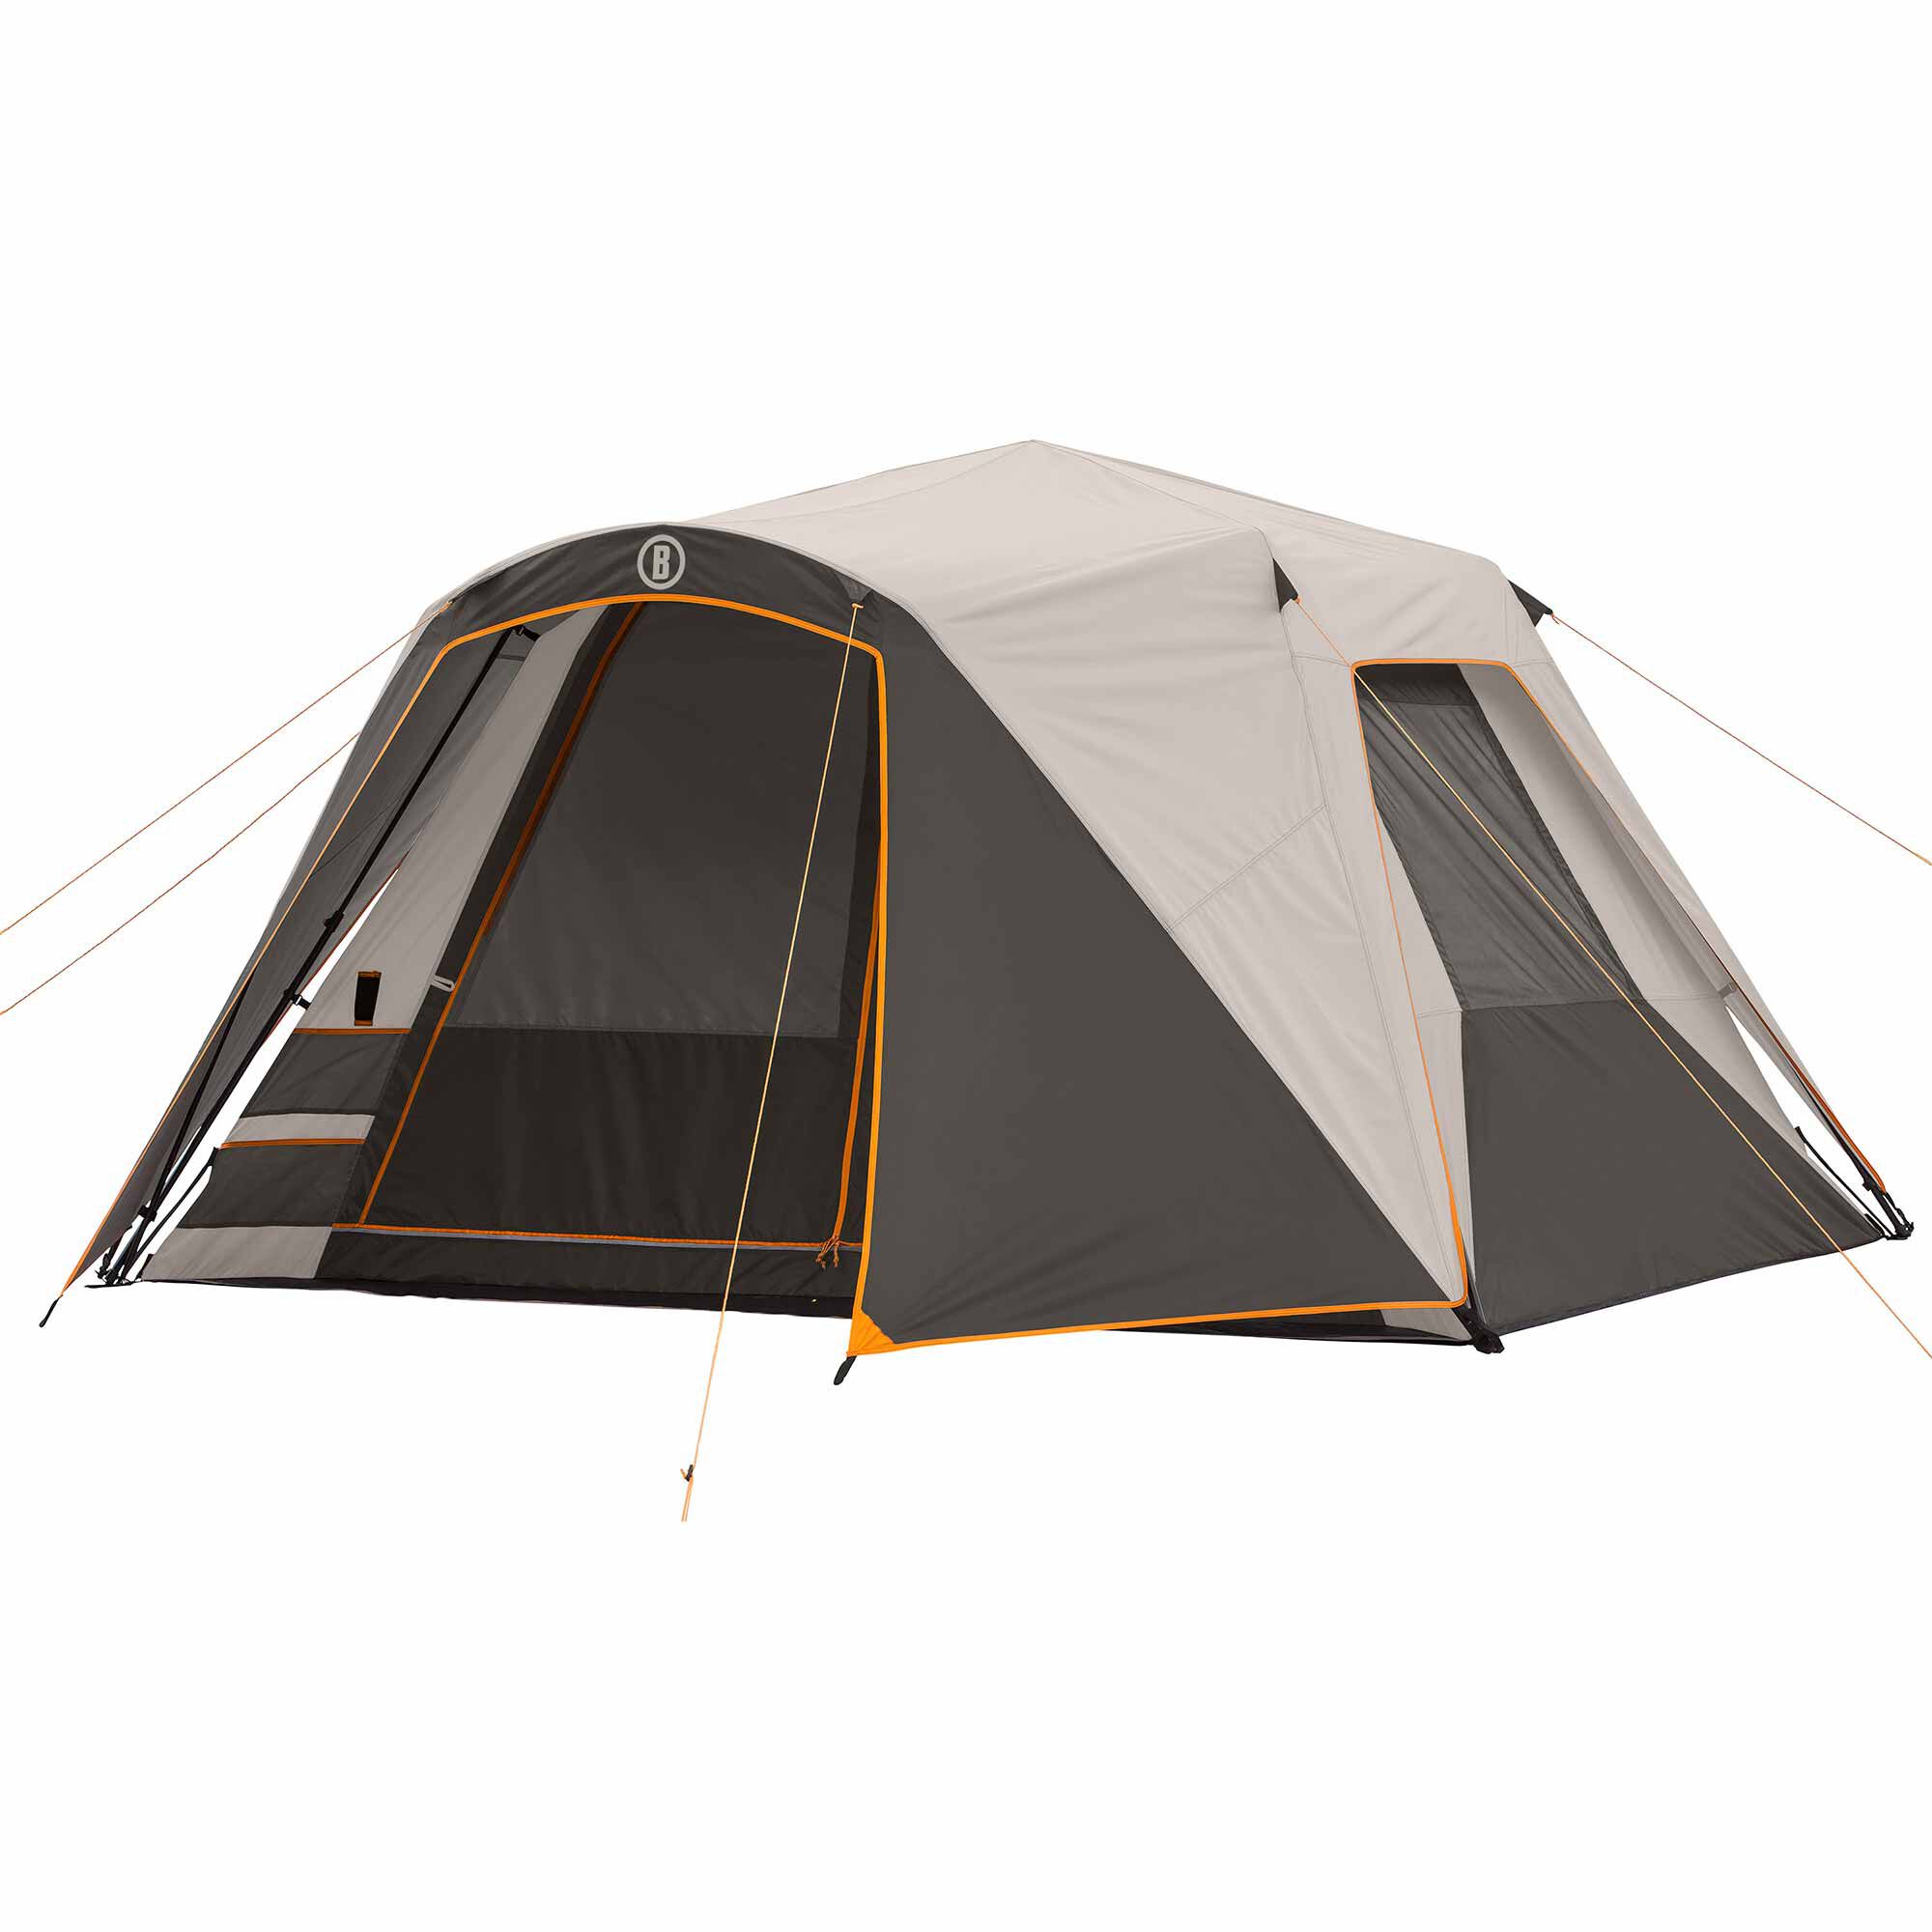 Buy Camping Tents and More. Shop Today For All of Your Outdoor Needs!